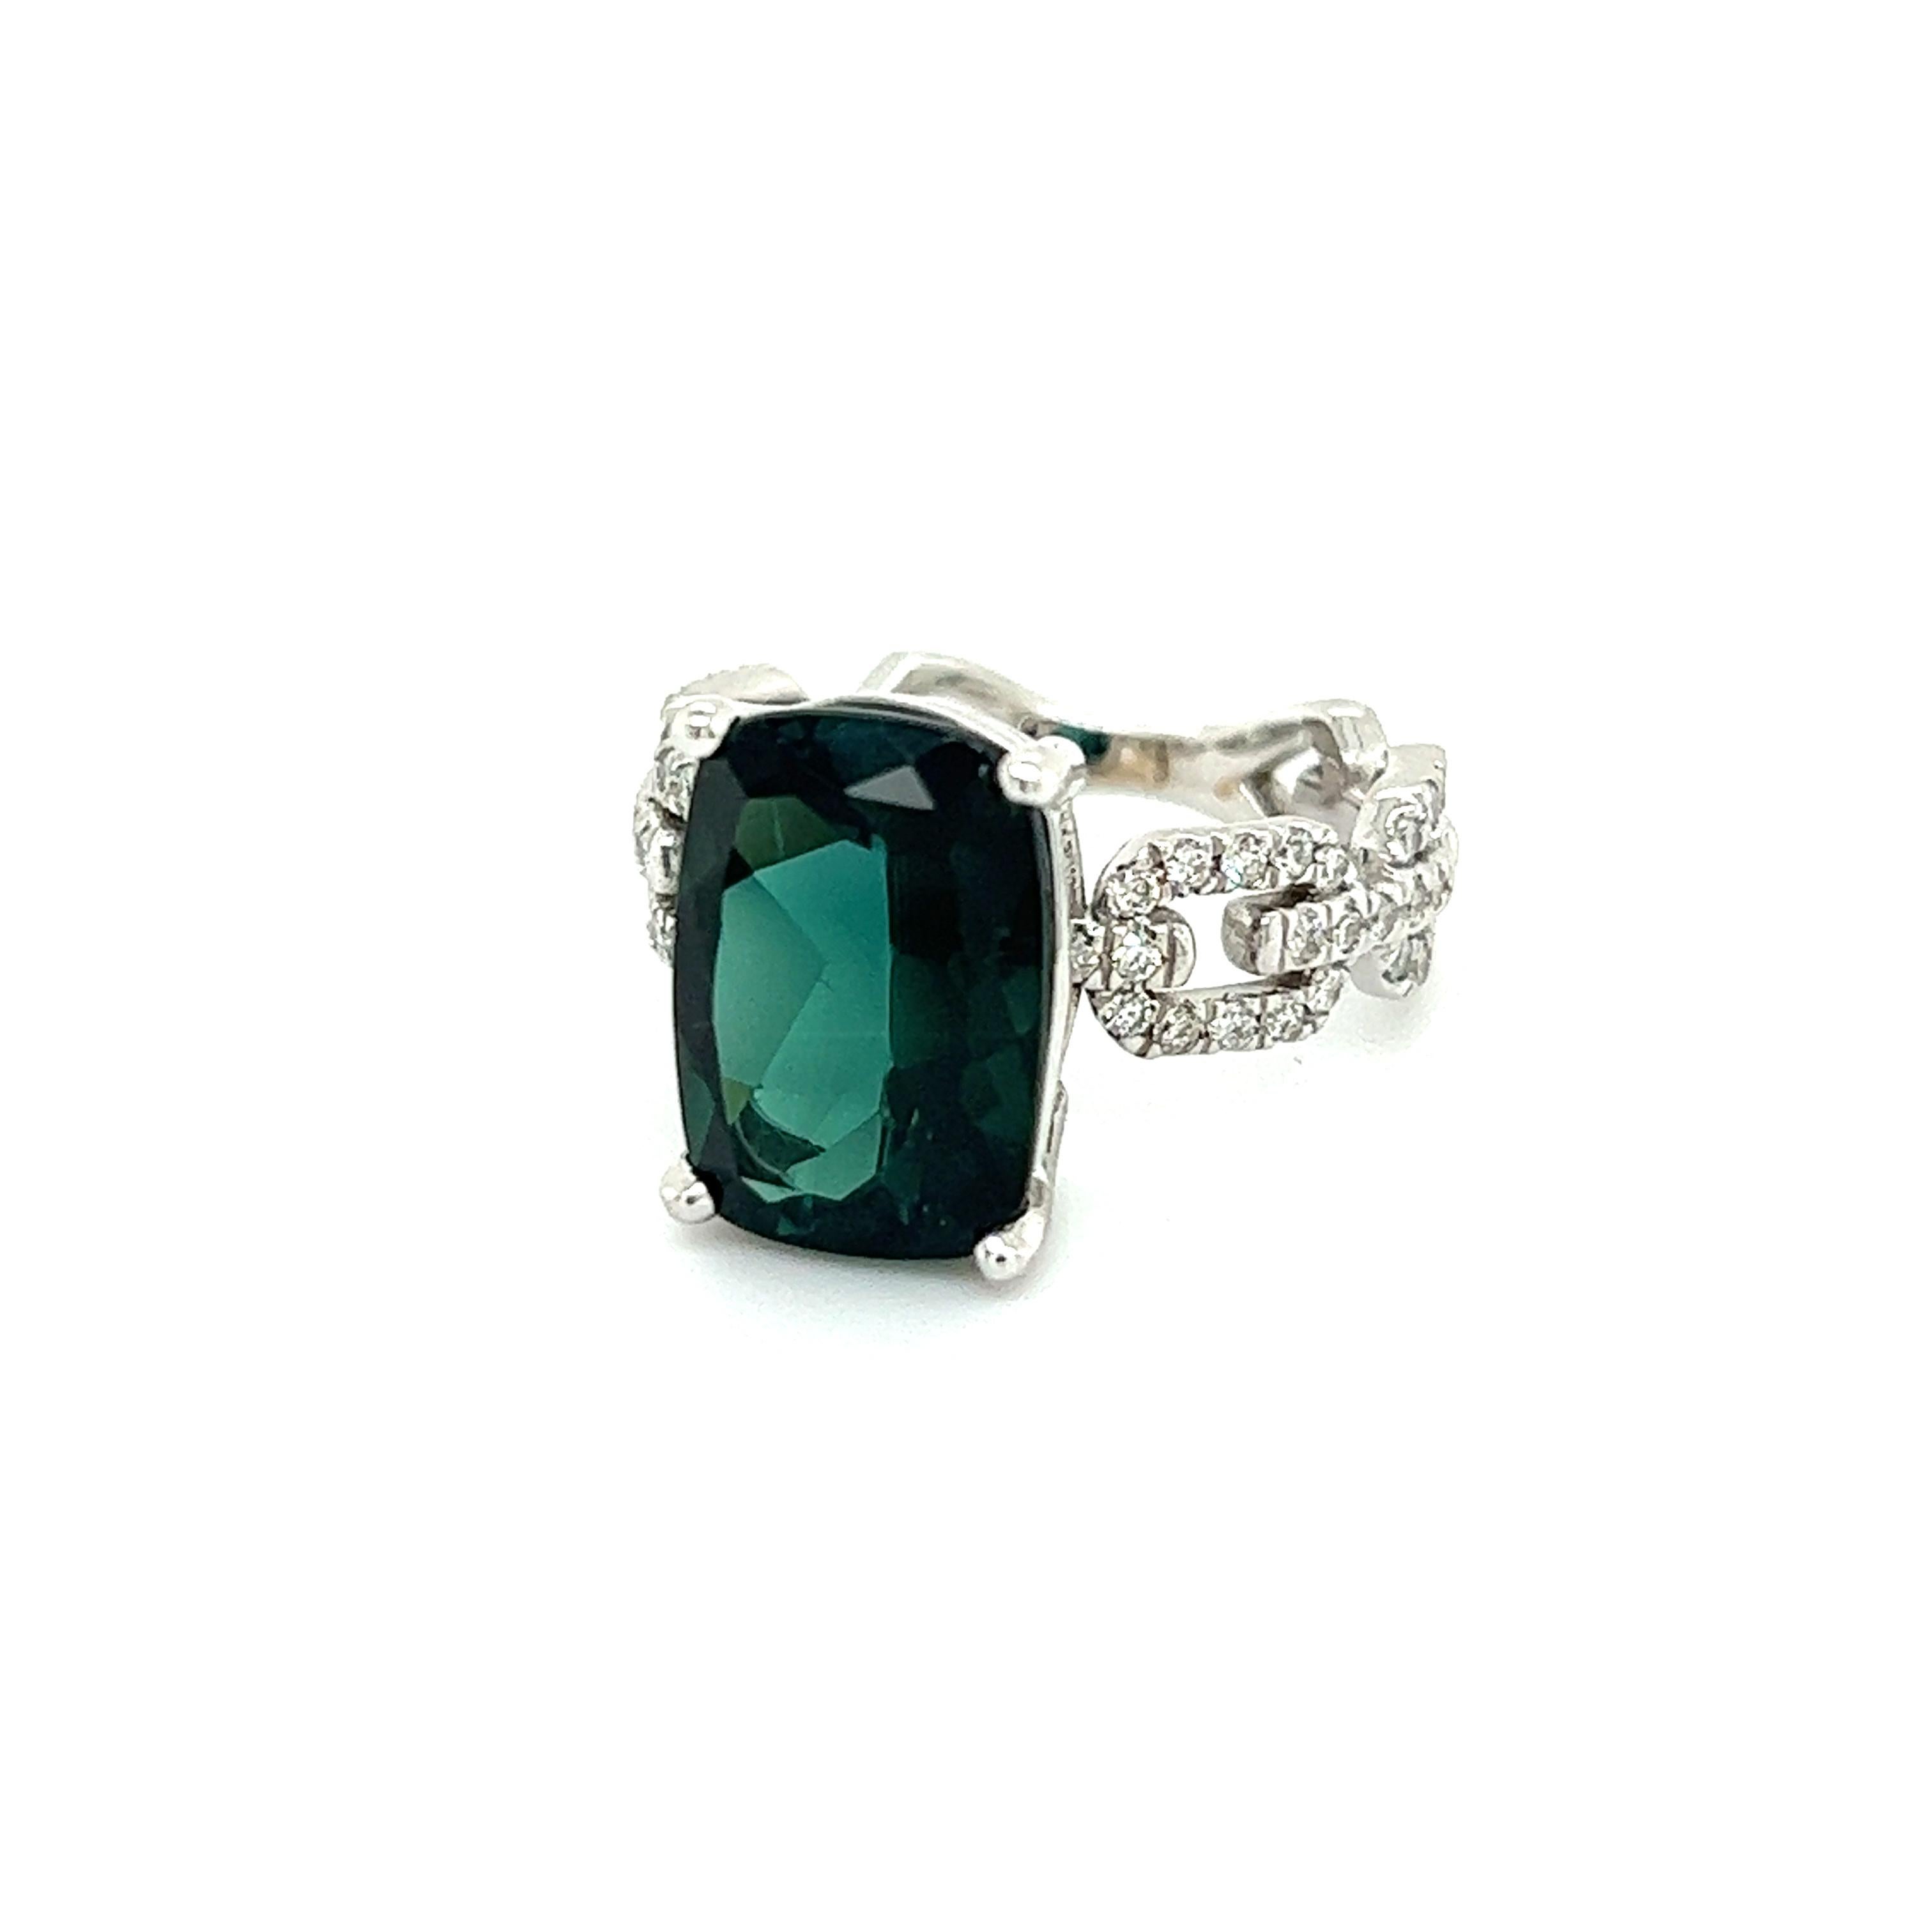 Natural Tourmaline Diamond Ring 6.5 14k White Gold 6.32 TCW Certified For Sale 6